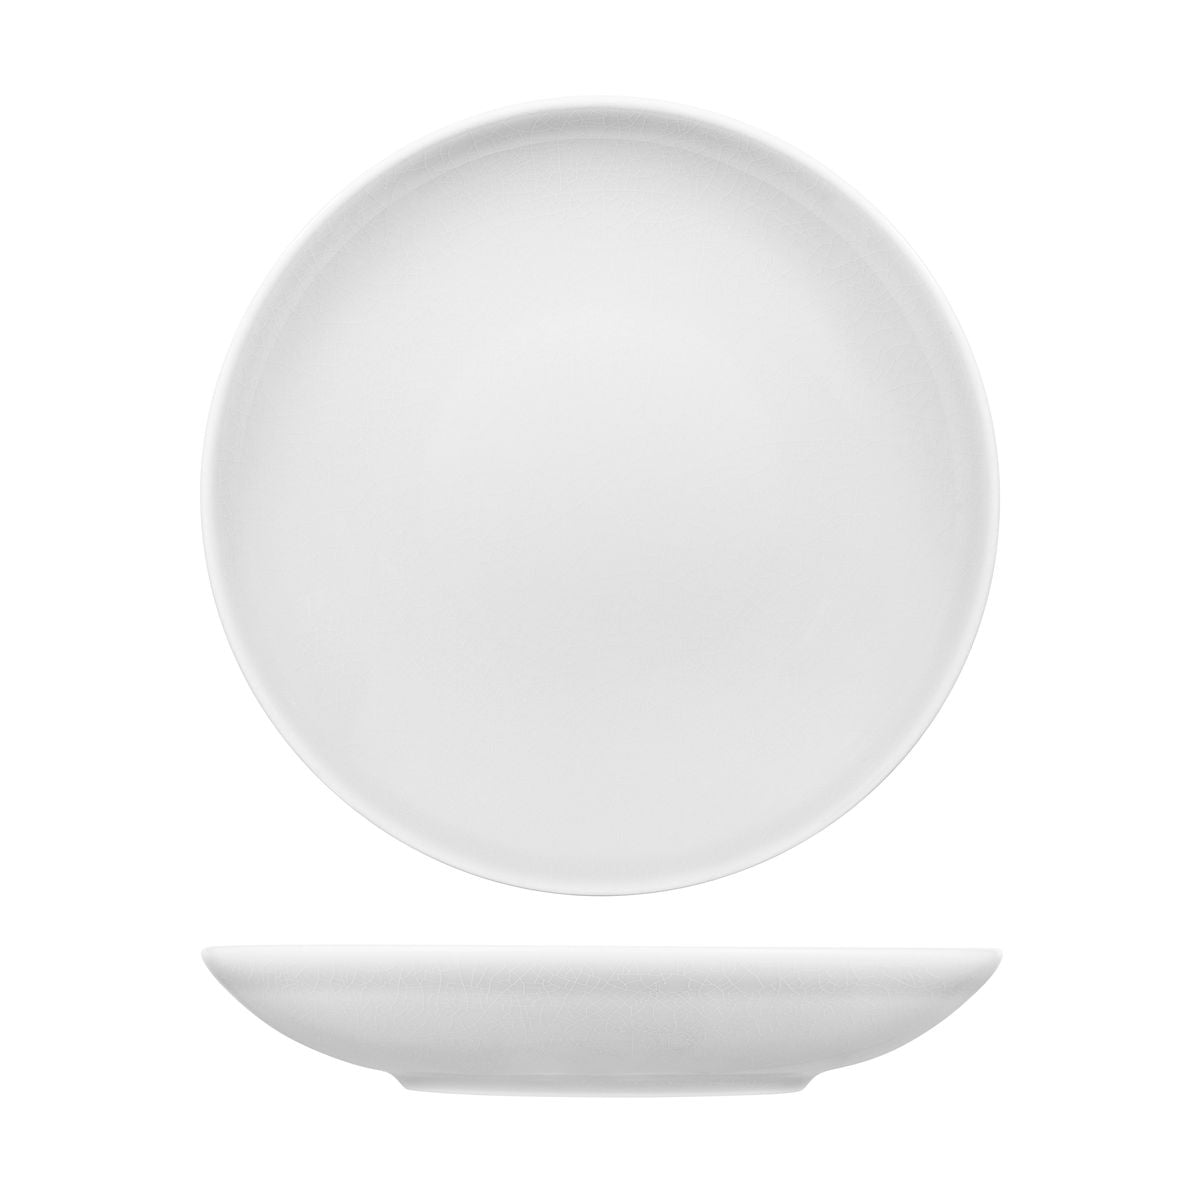 Round Coupe Bowl - White, 260Mm, Vintage from Rak Porcelain. made out of Porcelain and sold in boxes of 12. Hospitality quality at wholesale price with The Flying Fork! 